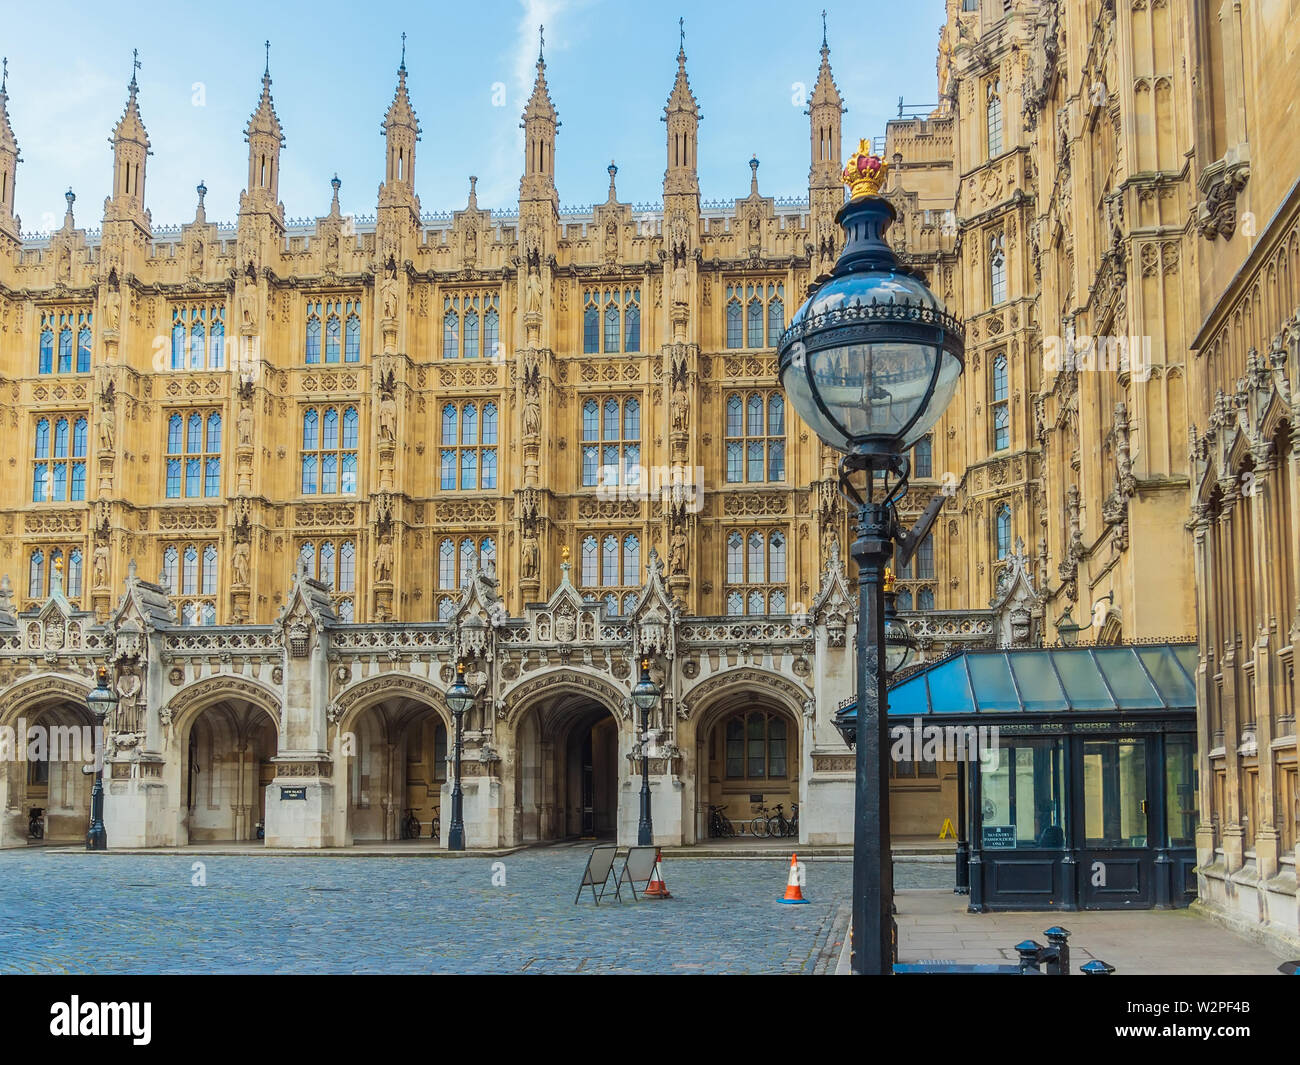 View of the New Palace Yard of the Westminster Palace and the Houses of Parliament, London, UK. Stock Photo